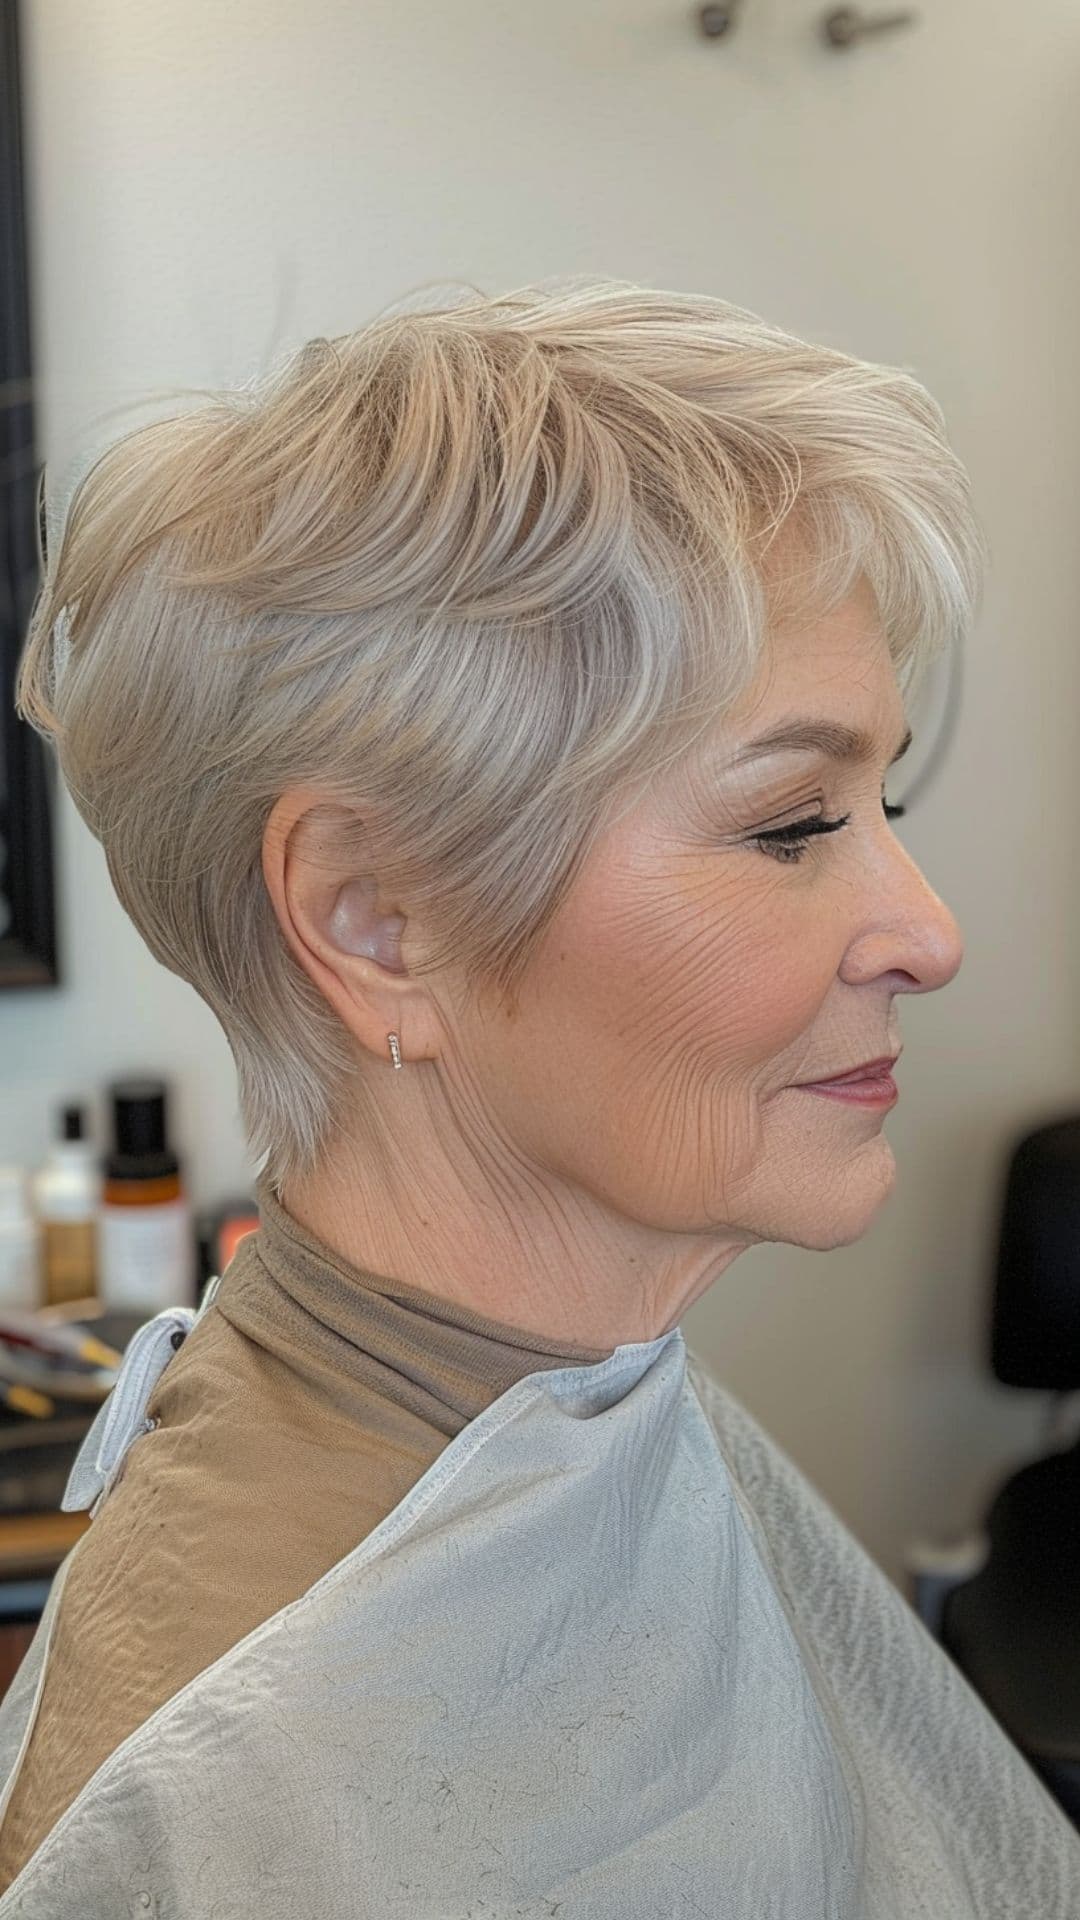 An old woman modelling a layered pixie with tapered sides.